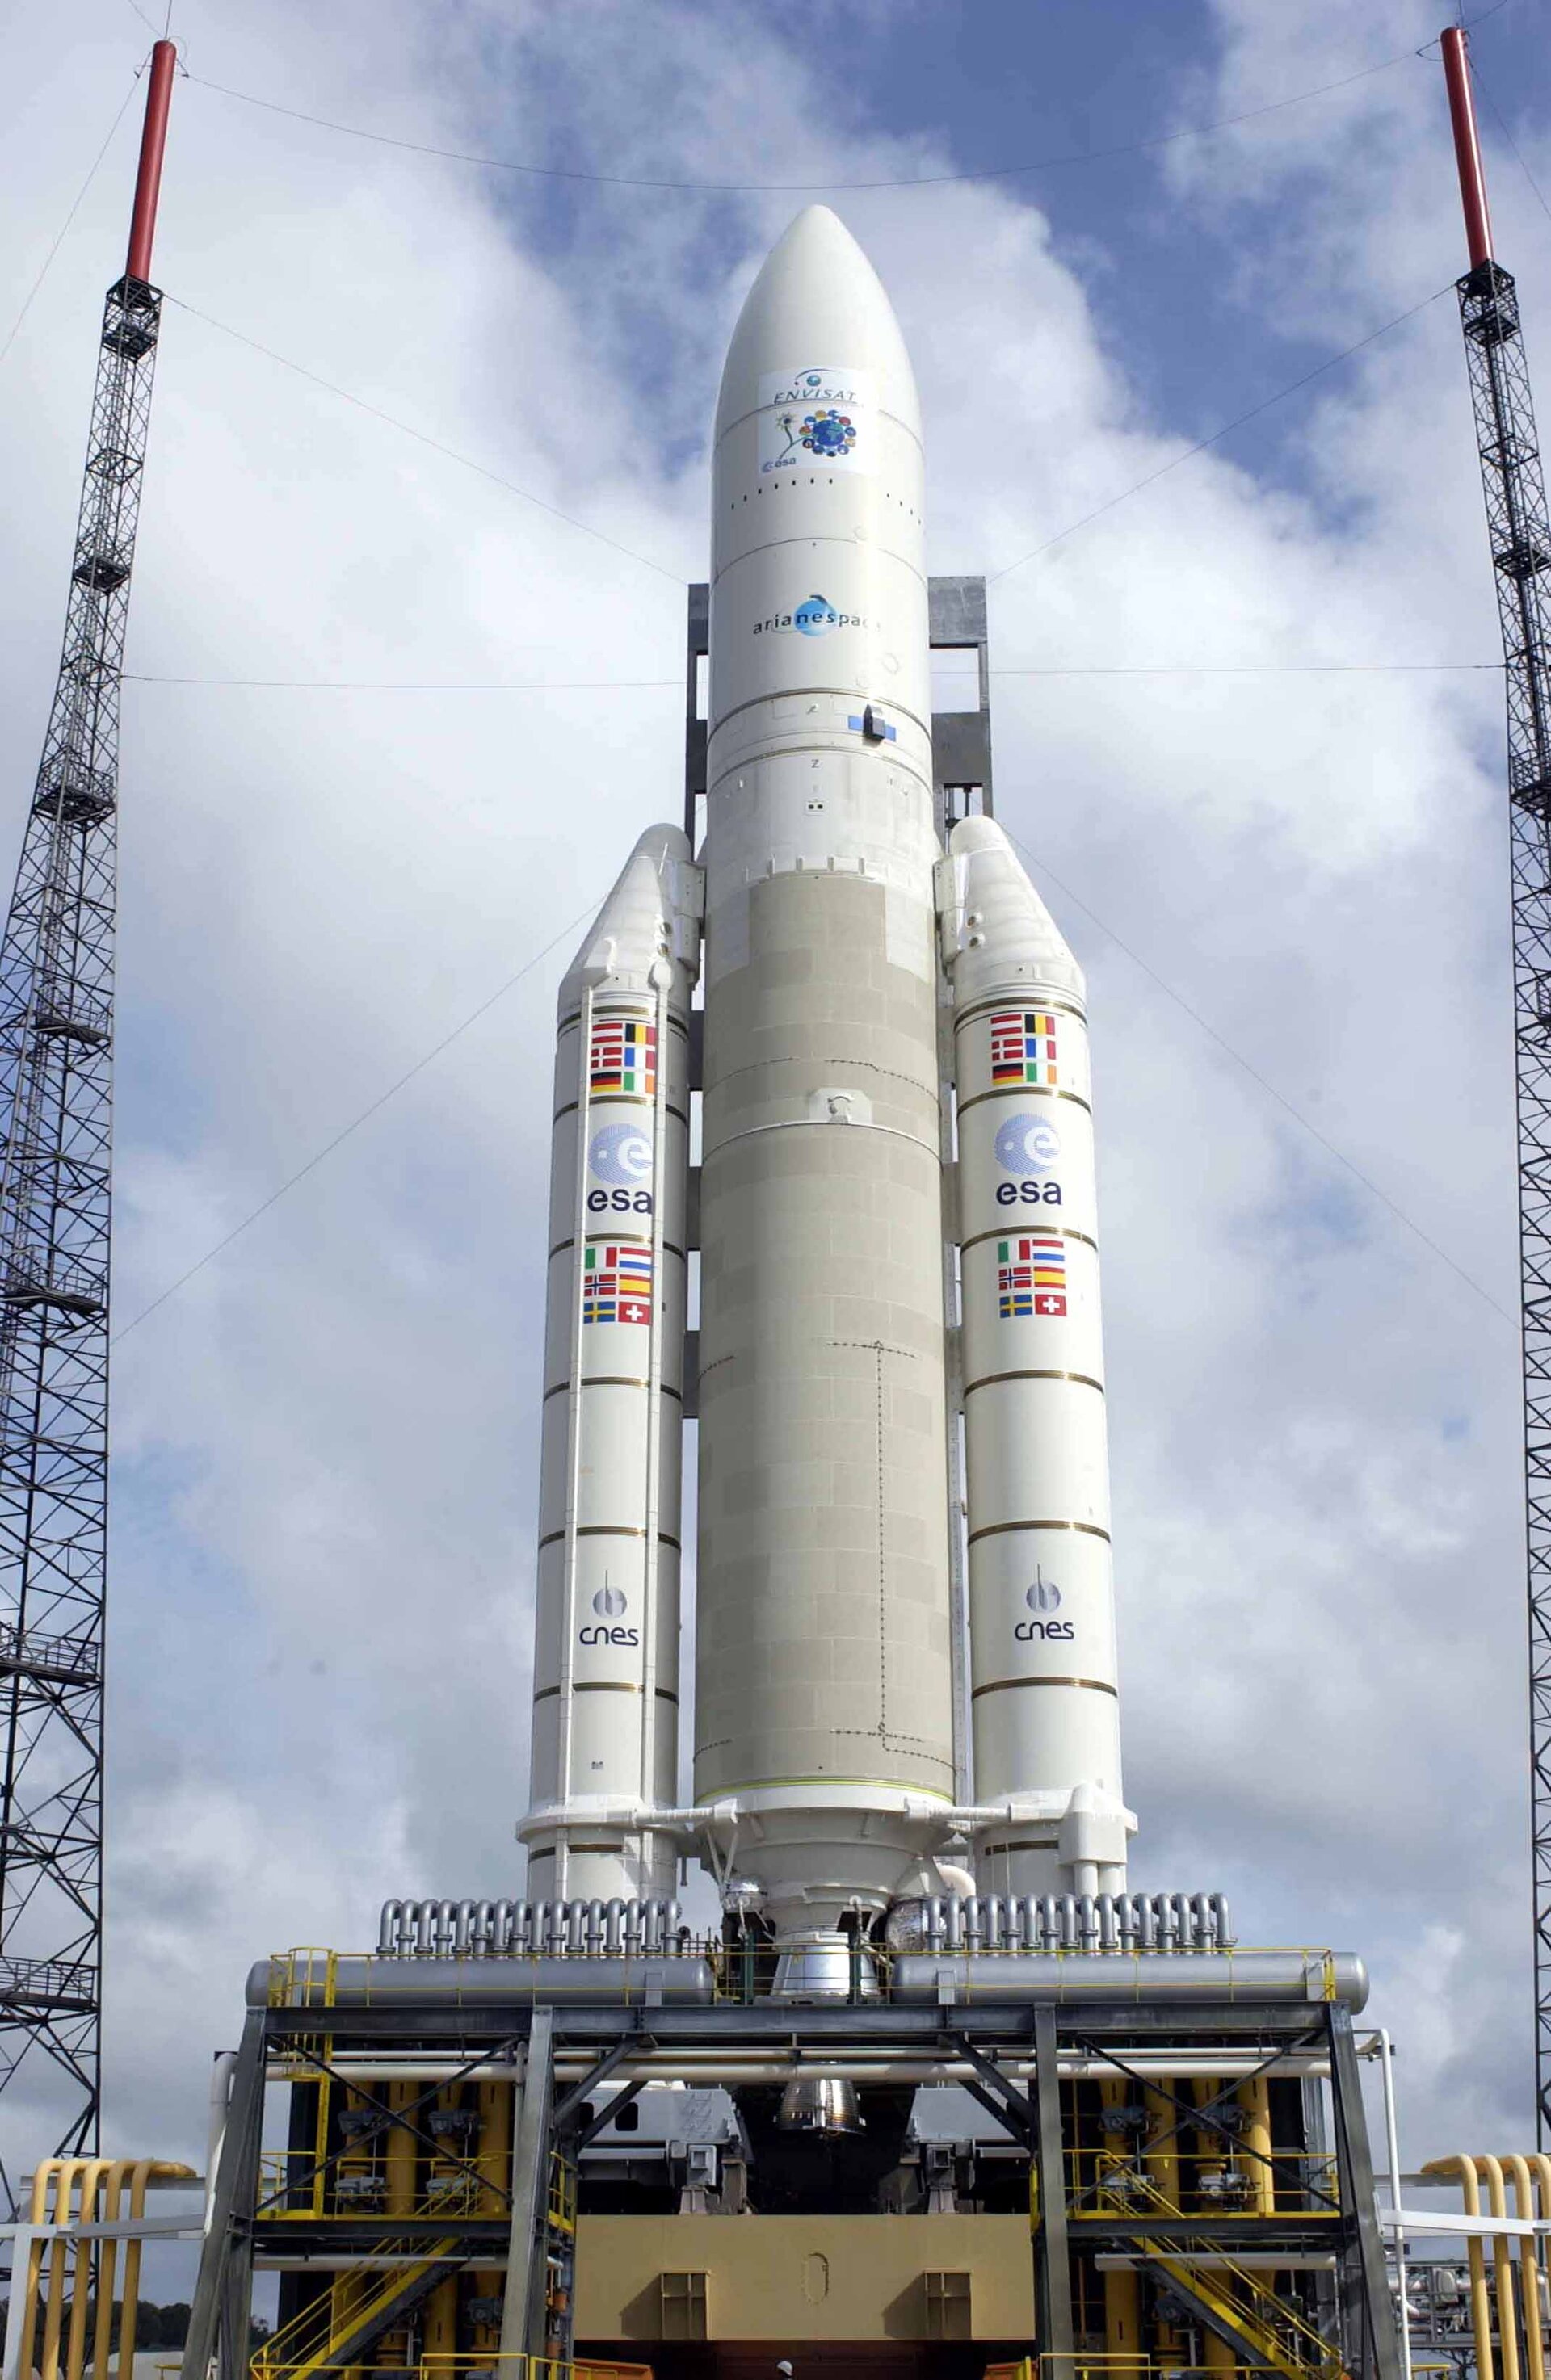 The powerful Ariane 5 takes off from Europe's spaceport in French Guiana